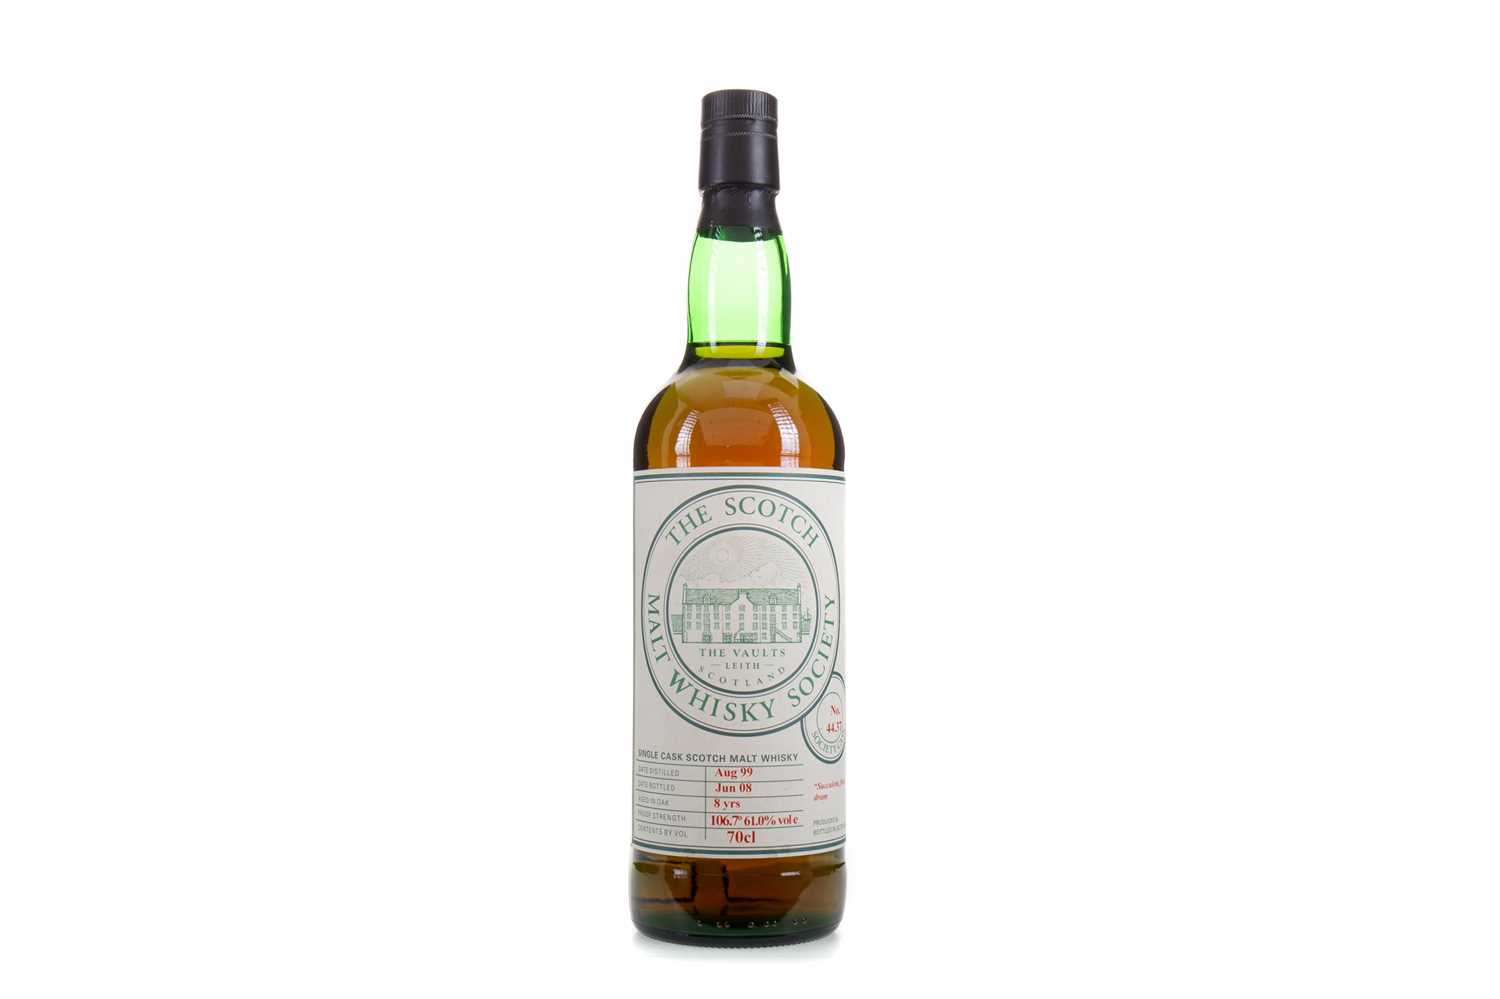 Lot 555 - SMWS 44.37 CRAIGELLACHIE 1999 8 YEAR OLD